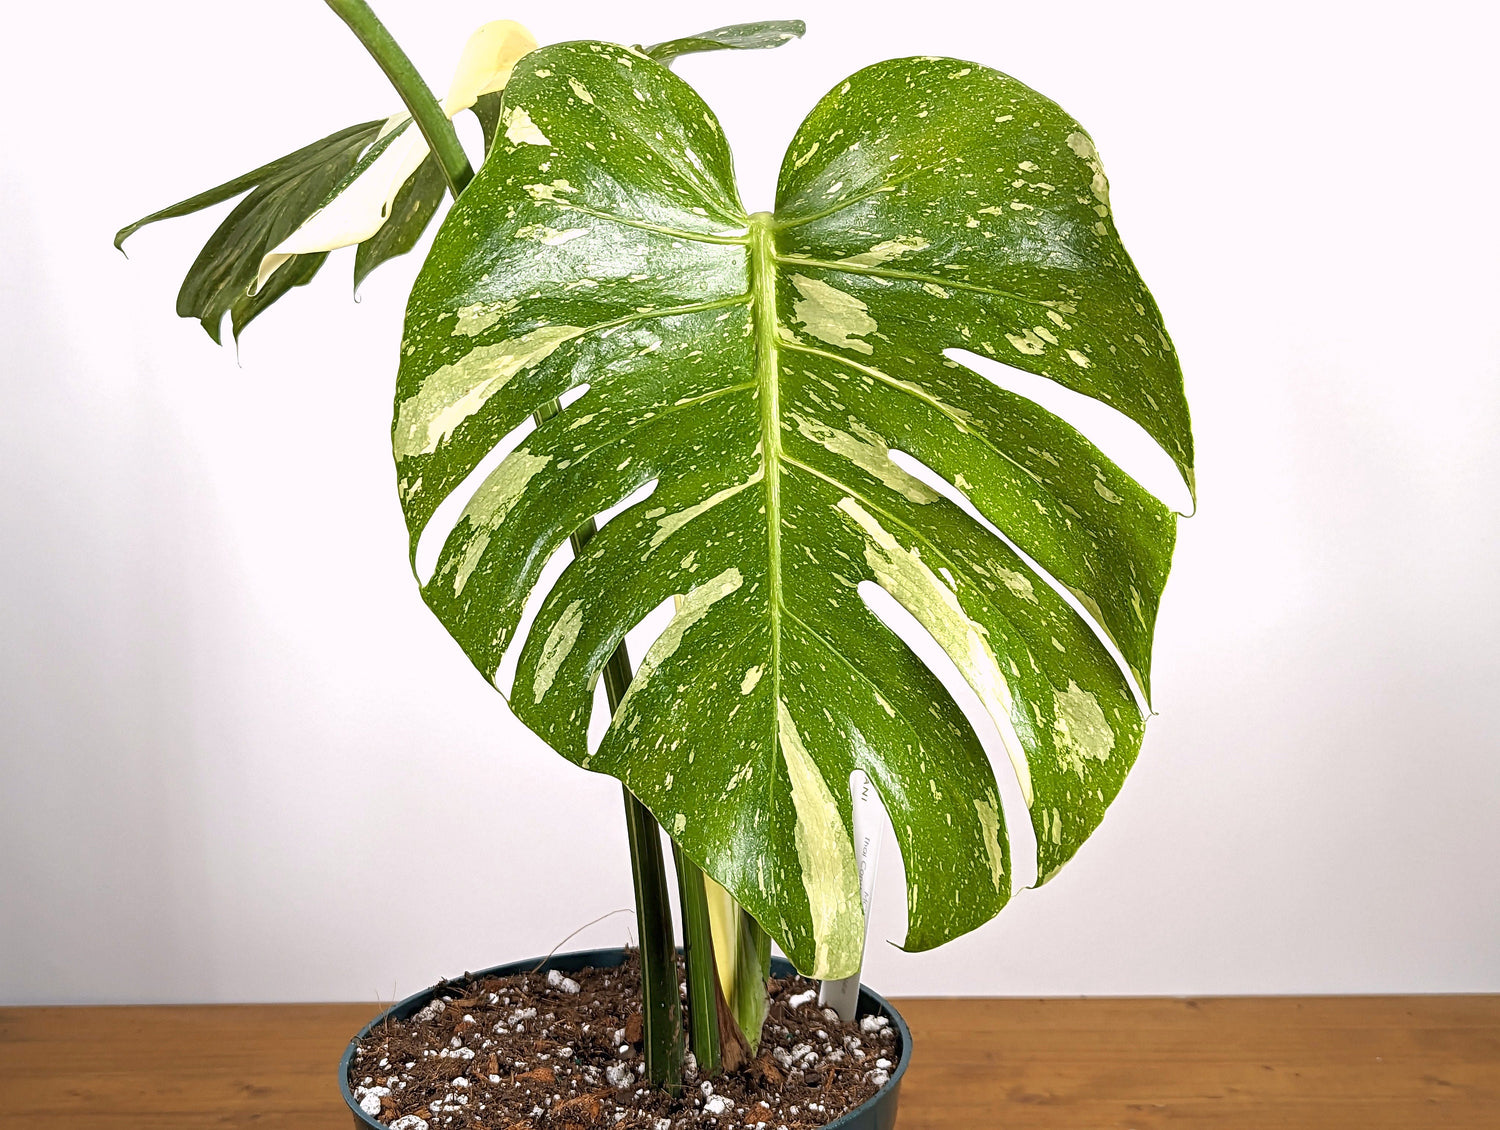 Monstera Thai Constellation Creme Brulee with Albo Traits 8 inch pot - Exact Plant Pictured